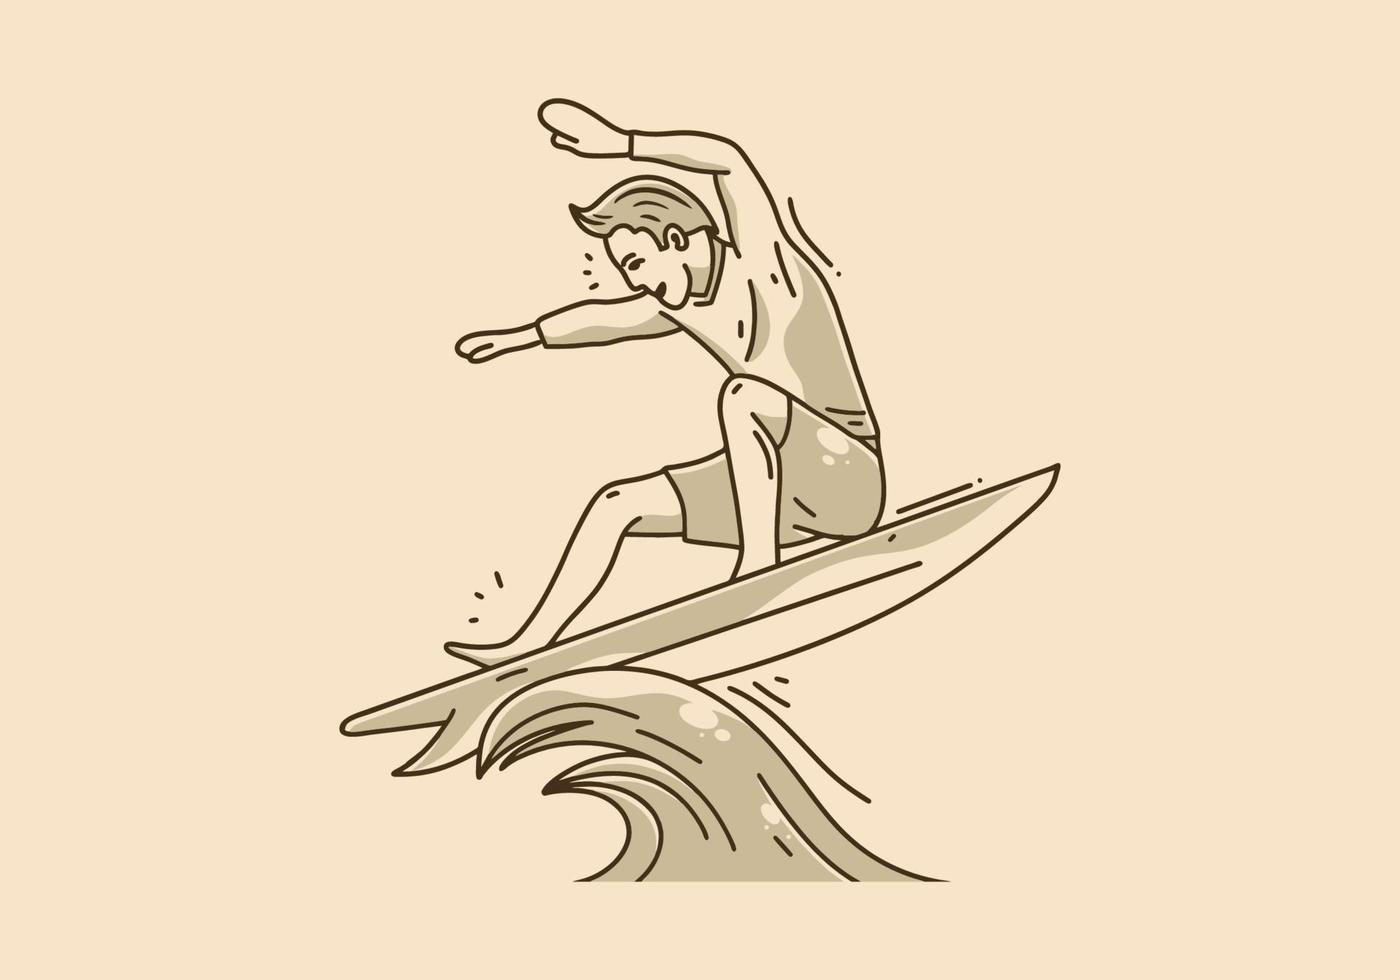 Vintage illustration of man surfing on the waves vector